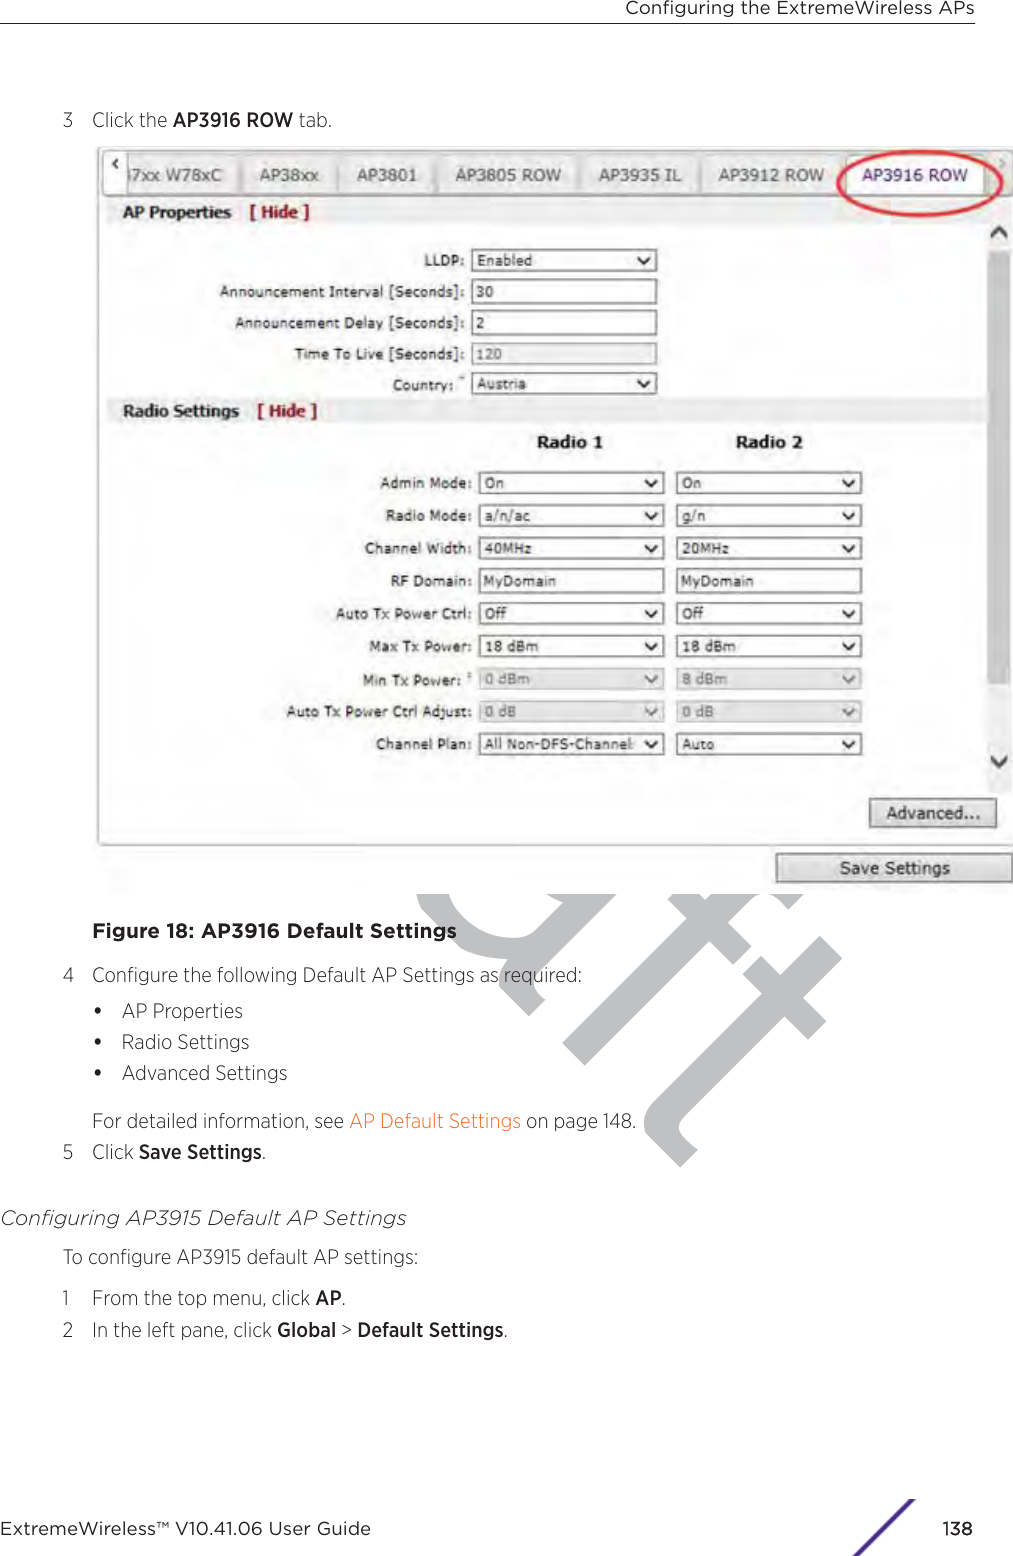 aft3 Click the AP3916 ROW tab.Figure 18: AP3916 Default Settings4 Conﬁgure the following Default AP Settings as required:•AP Properties•Radio Settings•Advanced SettingsFor detailed information, see AP Default Settings on page 148.5 Click Save Settings.Conﬁguring AP3915 Default AP SettingsTo conﬁgure AP3915 default AP settings:1 From the top menu, click AP.2 In the left pane, click Global &gt; Default Settings.Conﬁguring the ExtremeWireless APsExtremeWireless™ V10.41.06 User Guide 1138